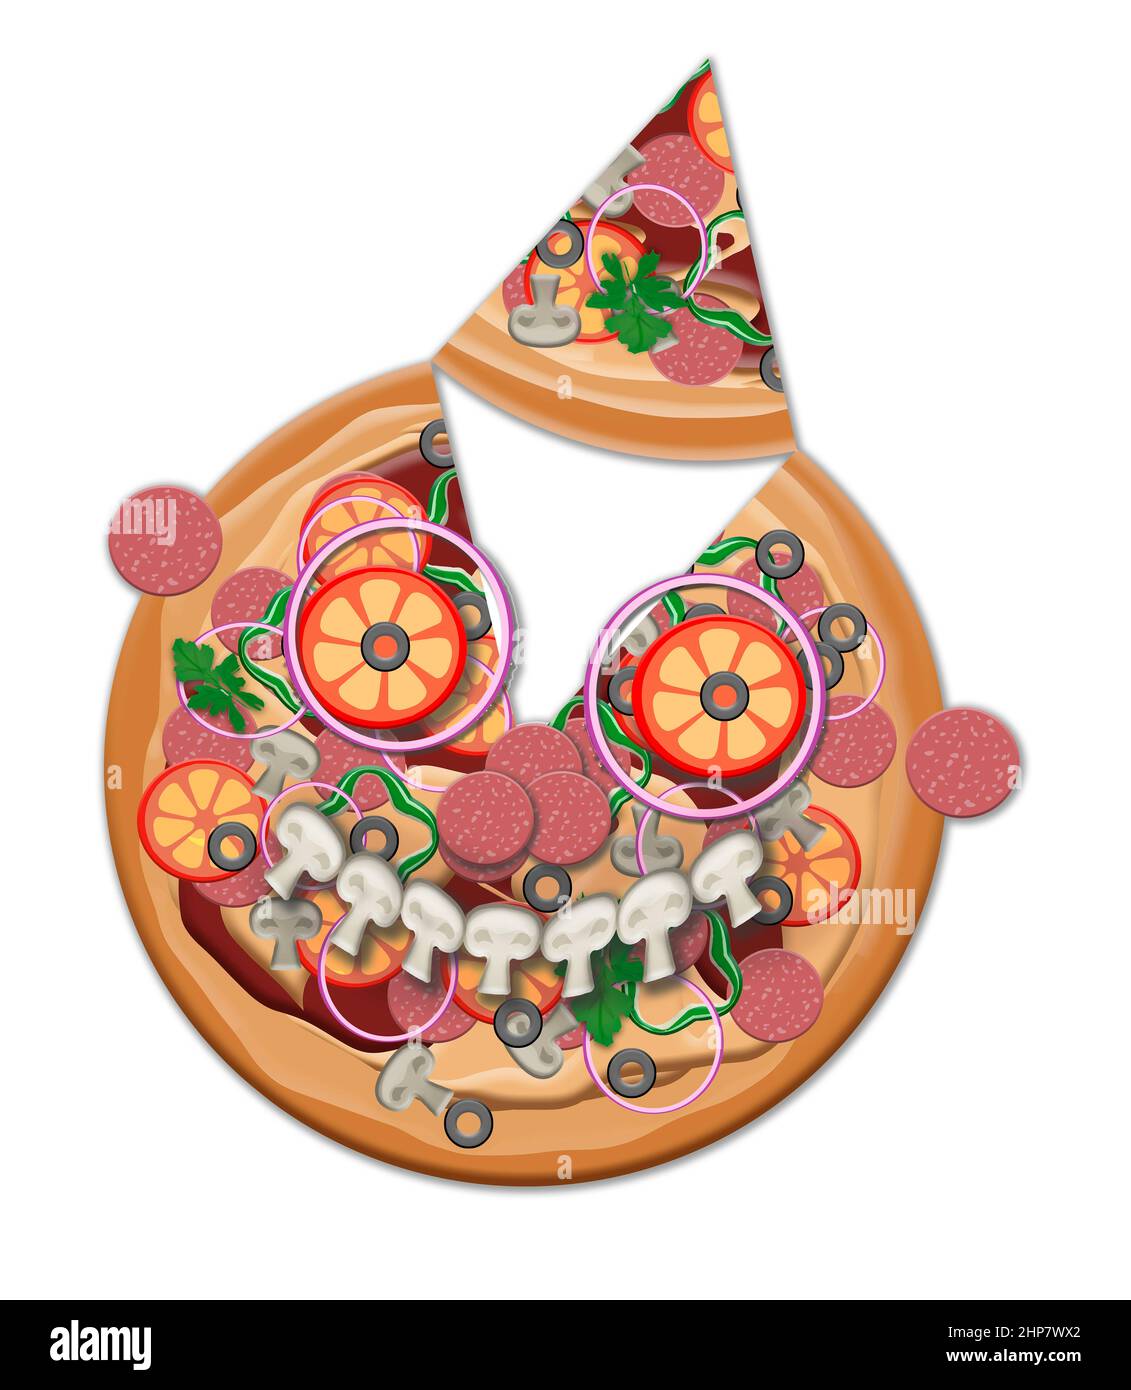 Pizza Party-A pizza is made to look like a happy face wearing a party hat in this 3-D illustration about pizza parties. Stock Photo